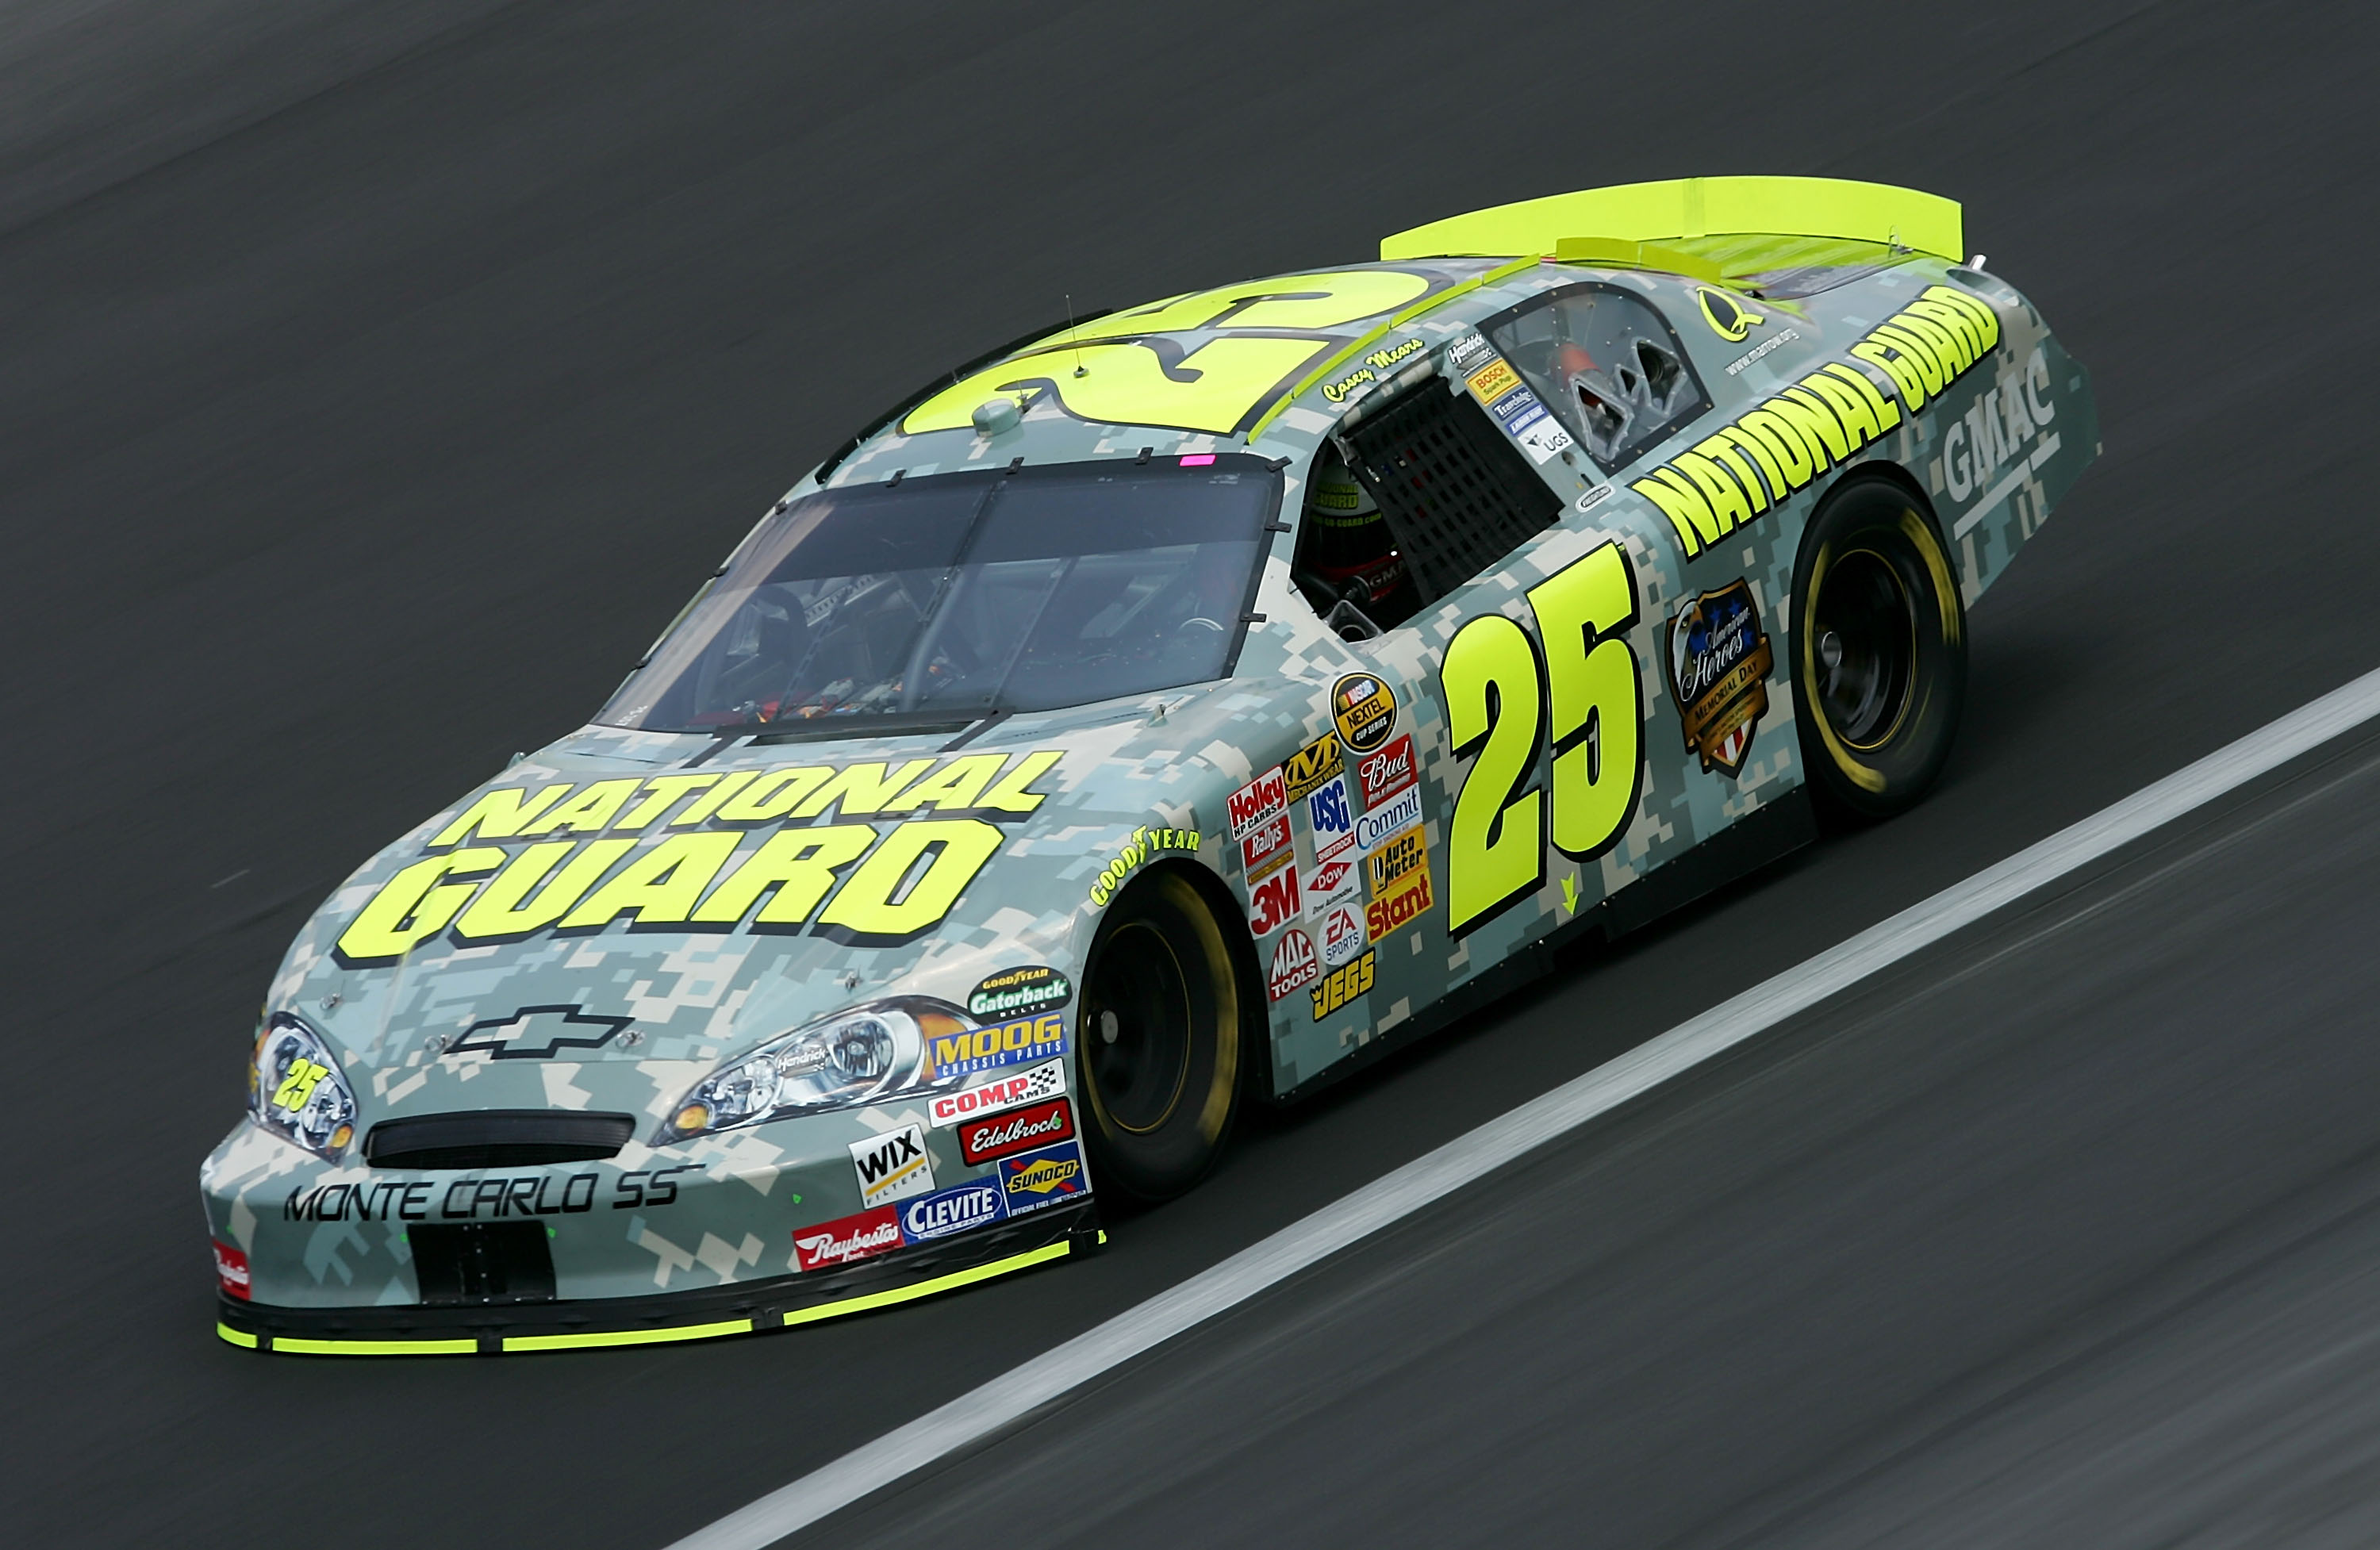 CONCORD, NC - MAY 26:  Casey Mears, driver of the #25 National Guard/American Heroes Chevrolet, drives during practice for the NASCAR Nextel Cup Series Coca-Cola 600 on May 26, 2007 at Lowe's Motor Speedway in Concord, North Carolina.  (Photo by Streeter